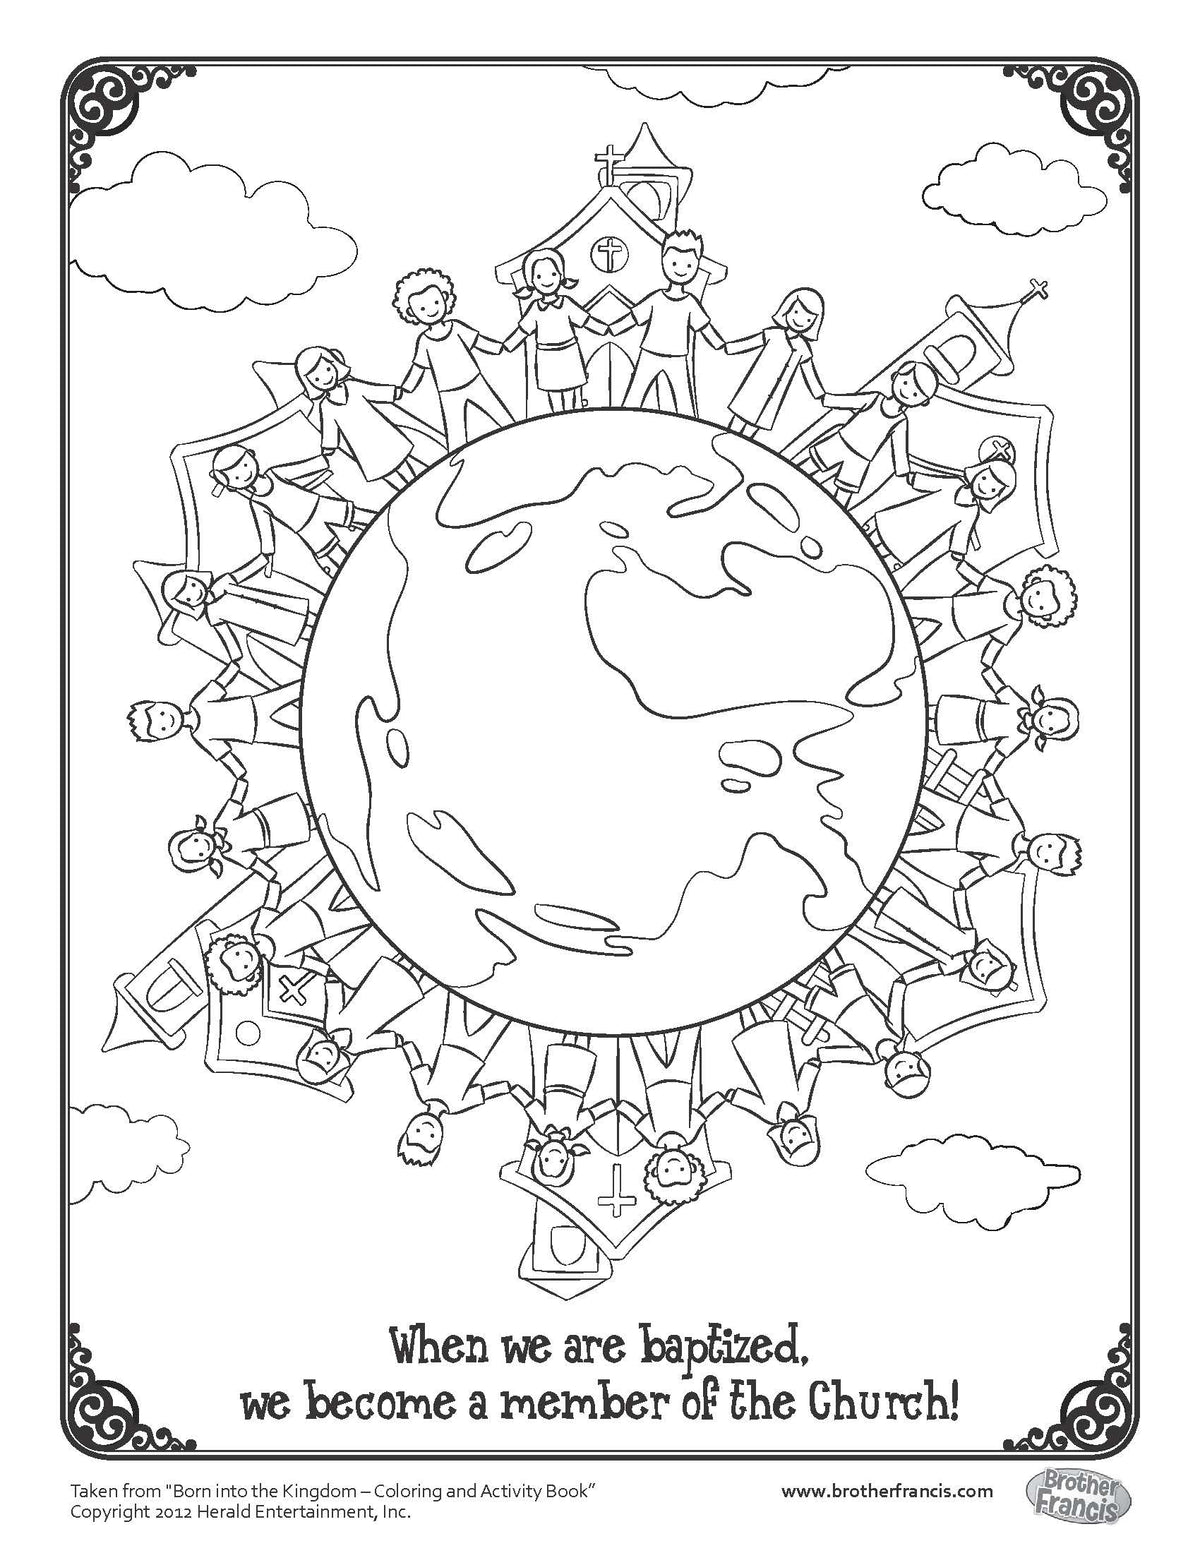 Download and Print - Baptism Coloring Page